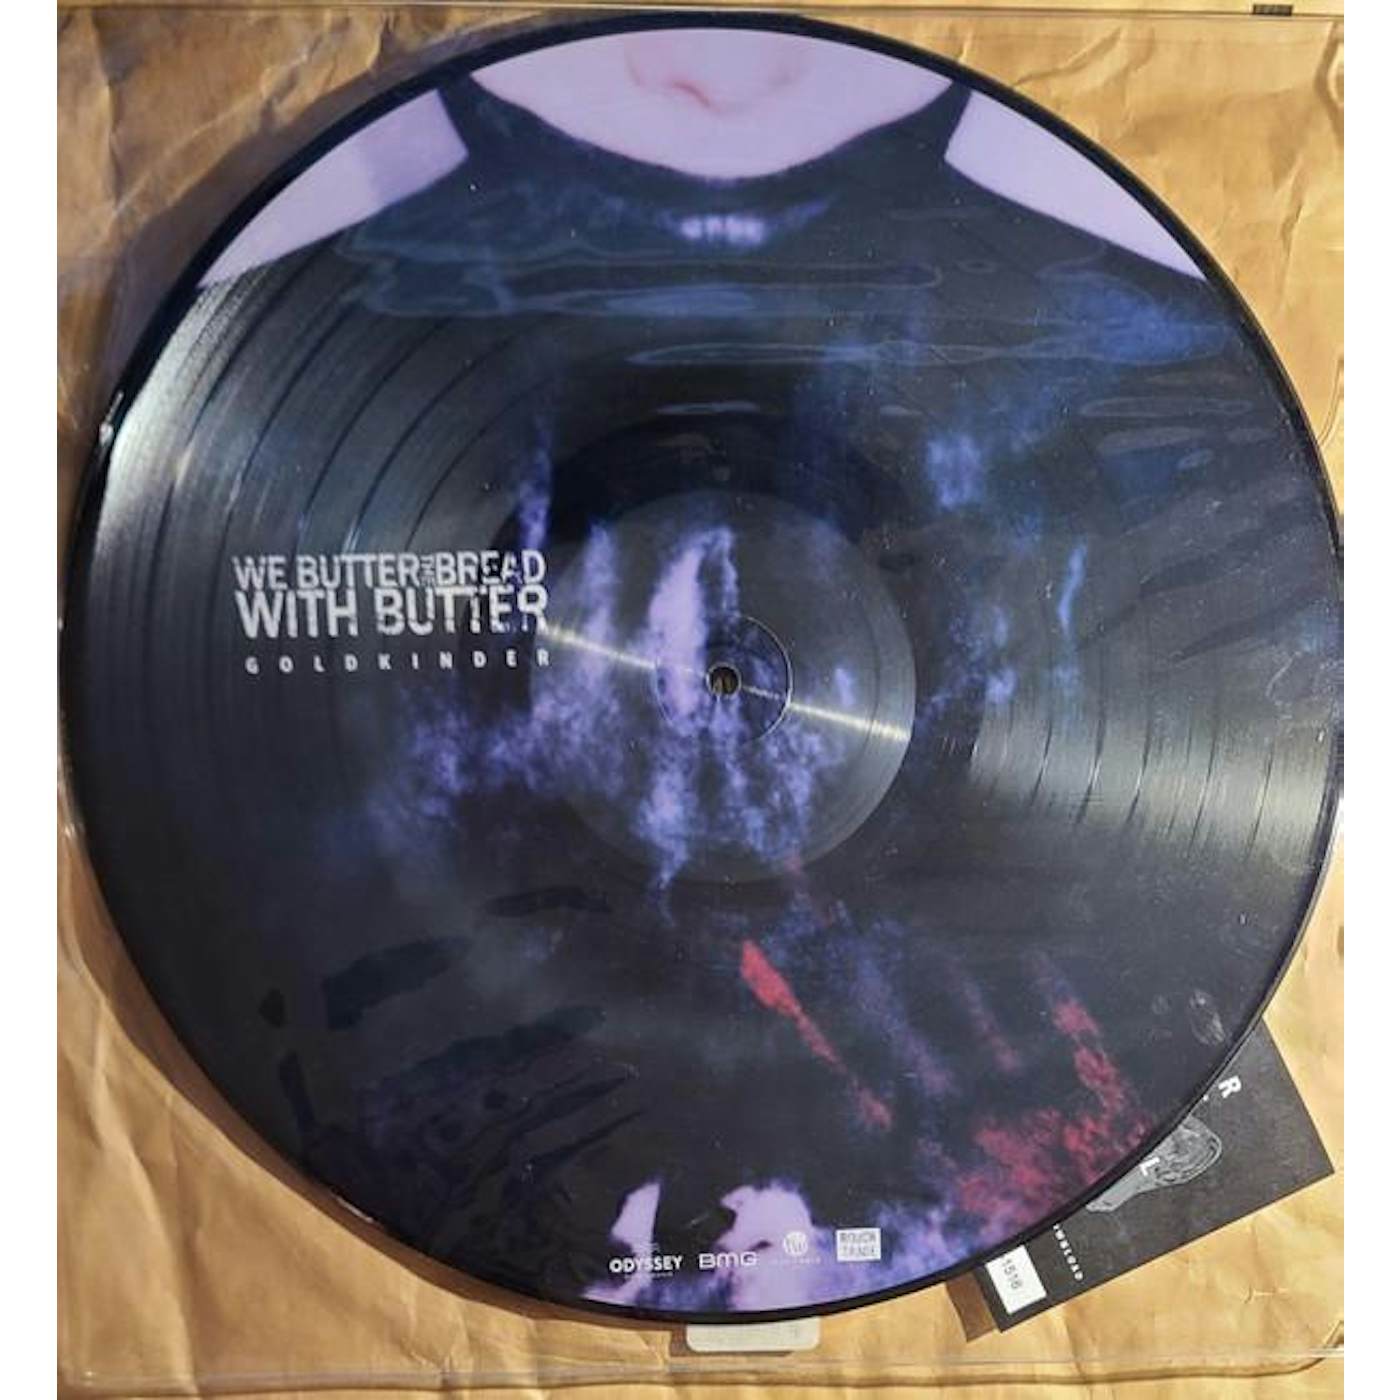 We Butter The Bread With Butter GOLDKINDER Vinyl Record